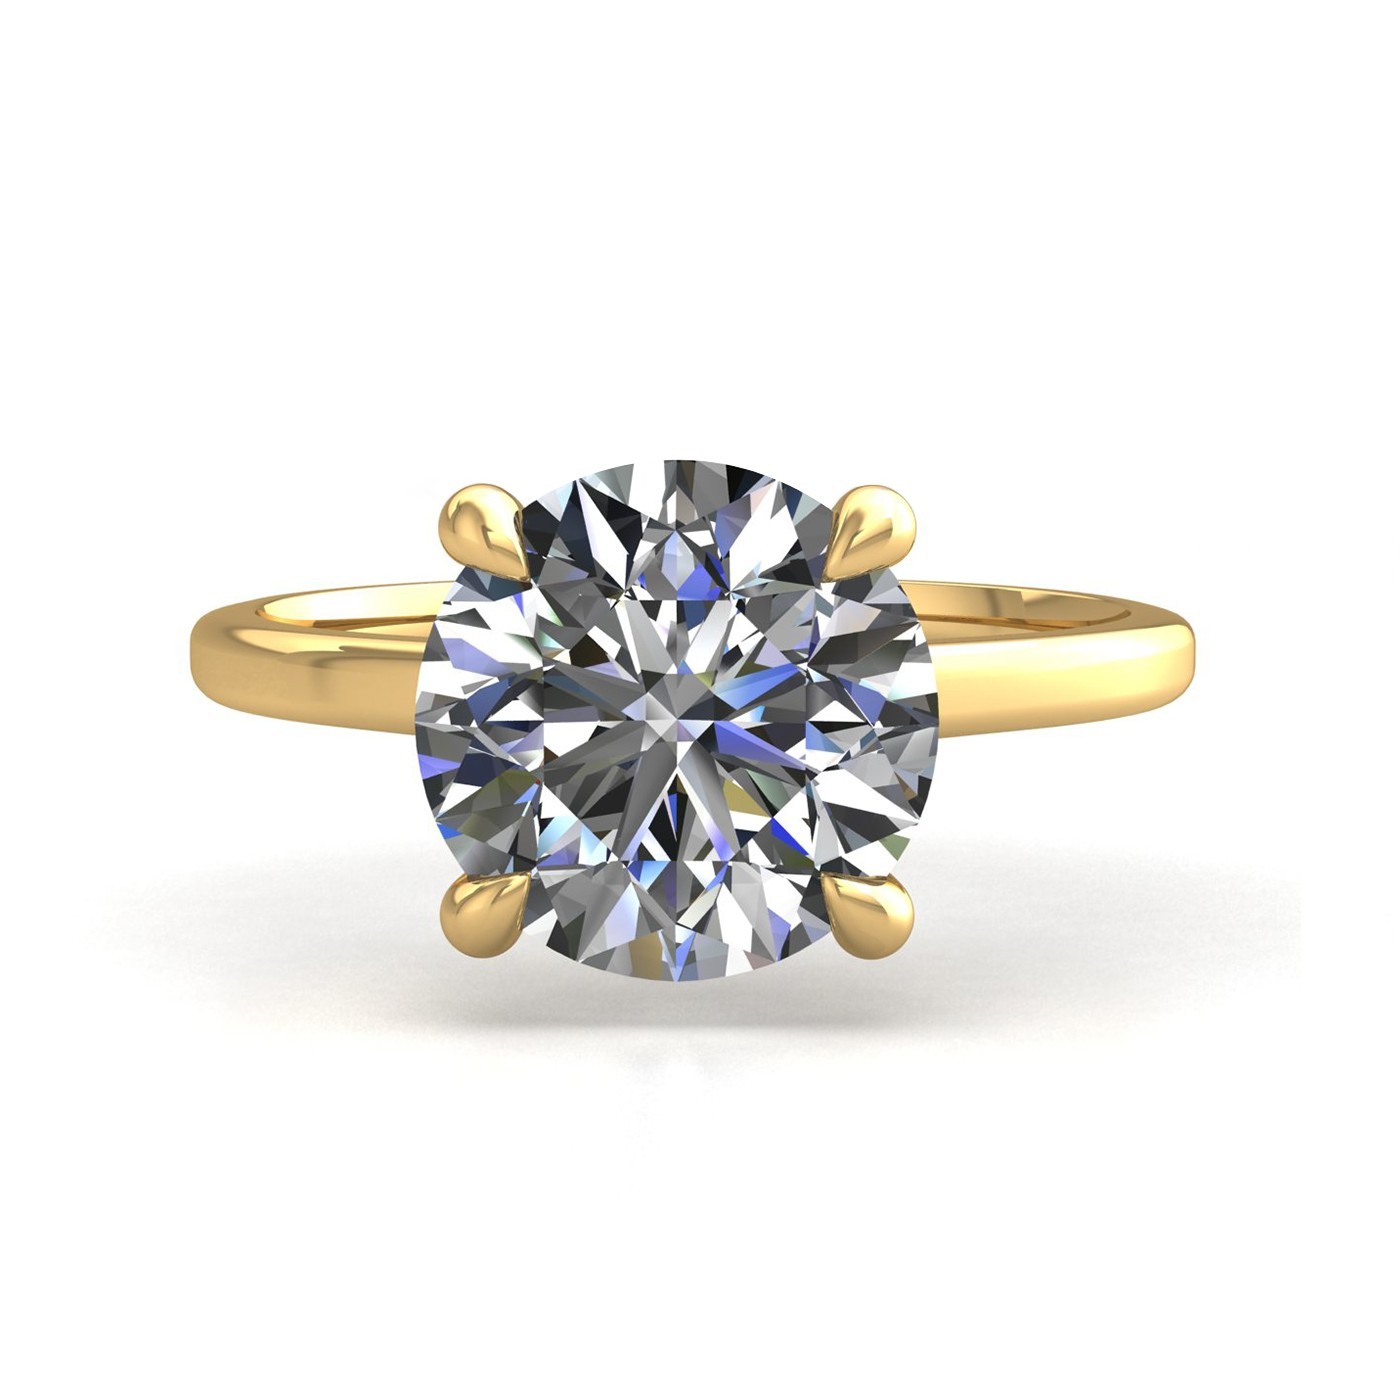 18k yellow gold  0,30 ct 4 prongs solitaire round cut diamond engagement ring with whisper thin band Photos & images